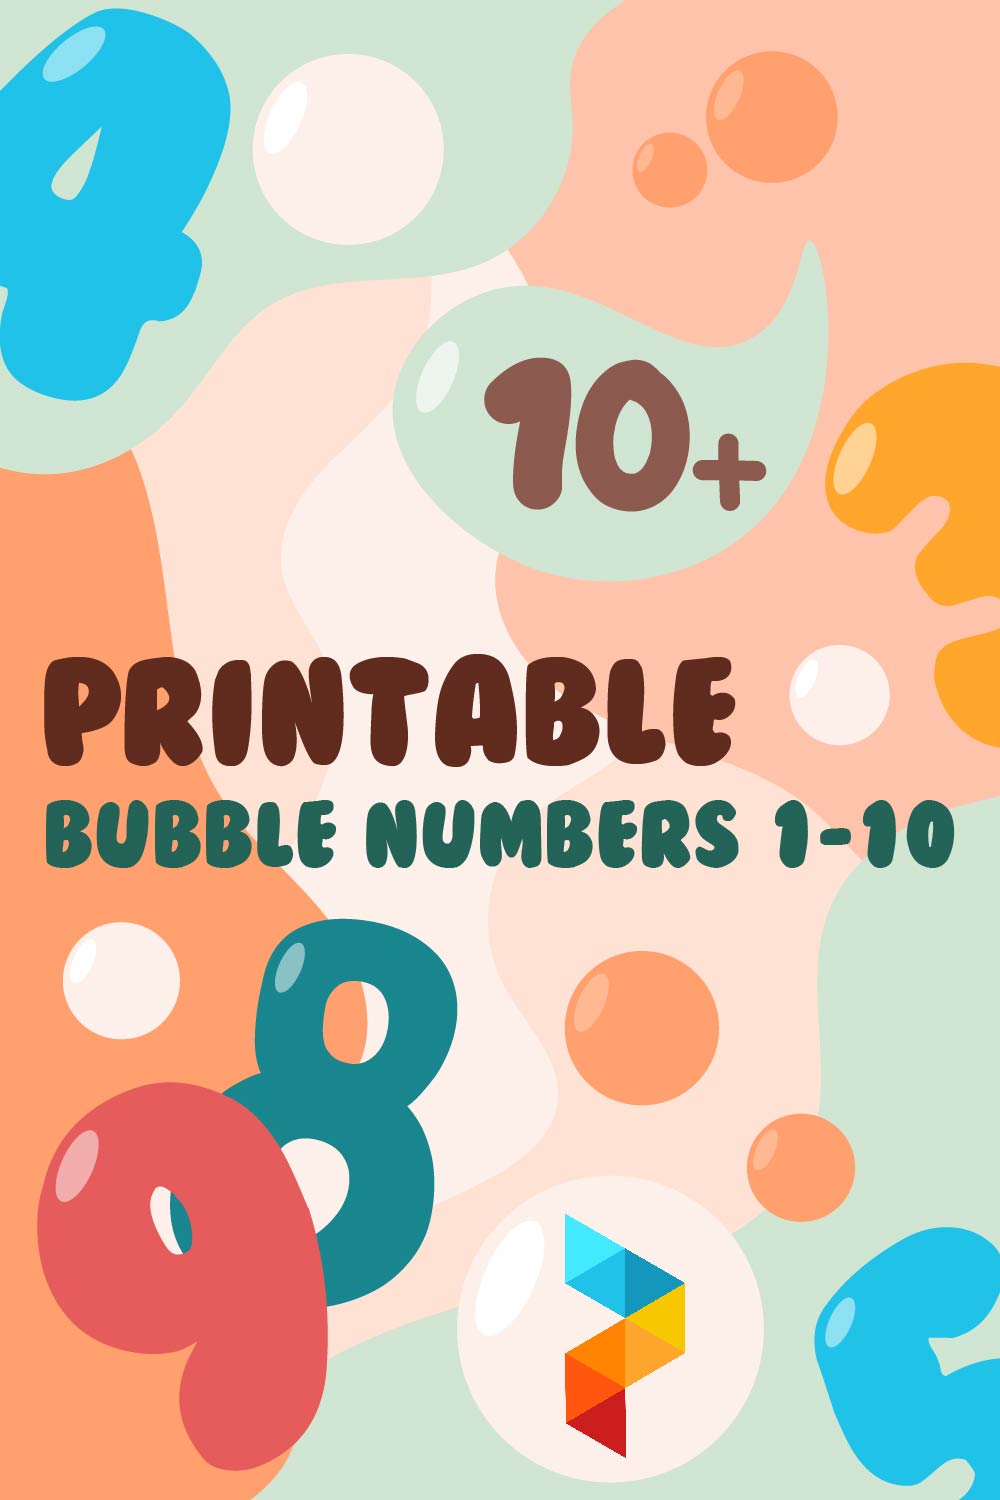 Bubble Numbers 1-10